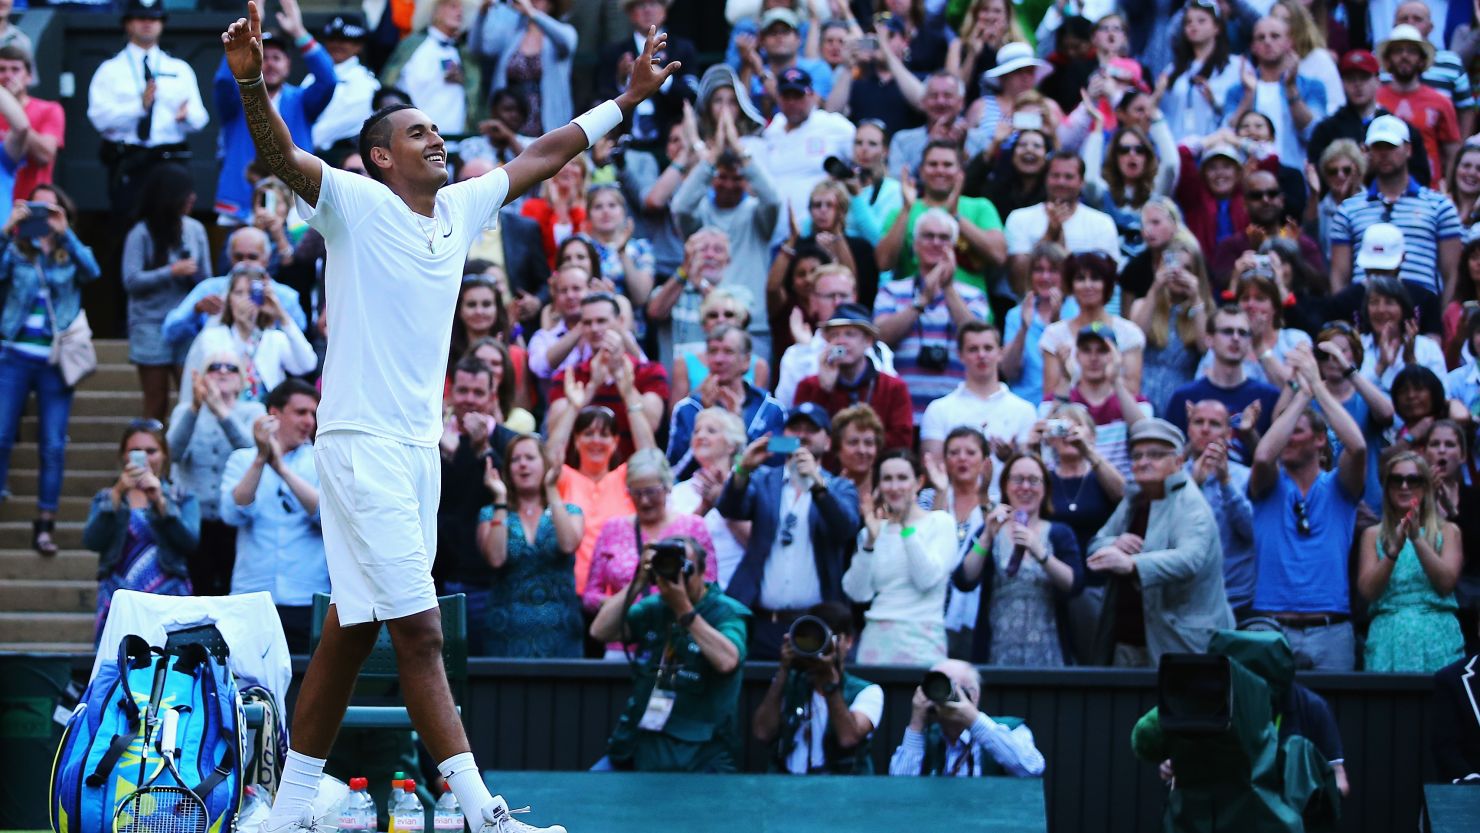 Australia's Nick Kyrgios celebrates after winning his fourth round match against Rafael Nadal at Wimbledon.